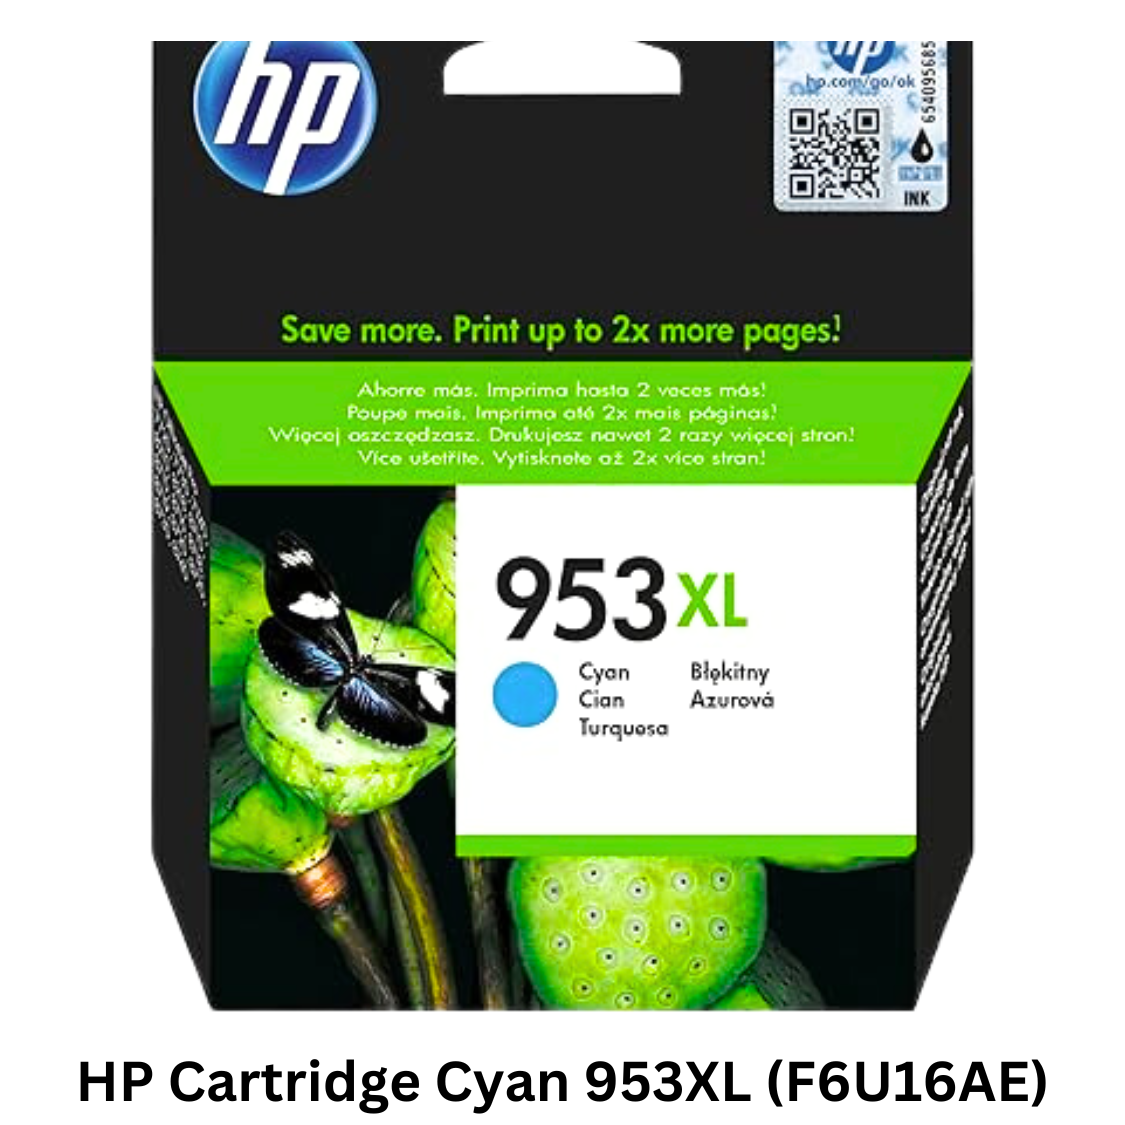 HP Cartridge Cyan 953XL (F6U16AE) - Genuine HP ink cartridge for brilliant cyan prints, delivering high-quality and consistent results for all your printing needs